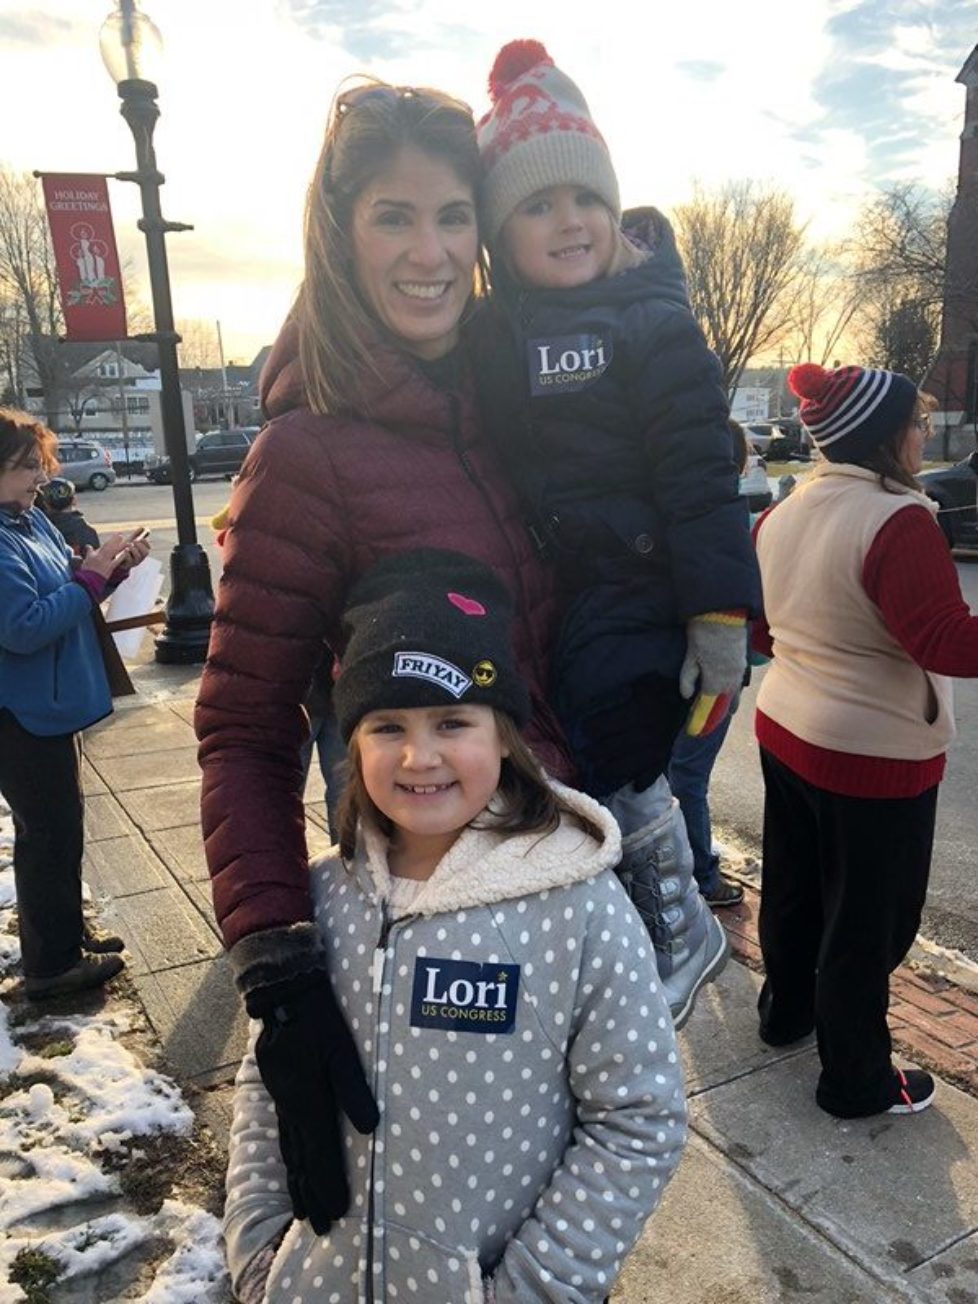 Lori and her daughters march in the 2018 Women's March in Ayer, Massachusetts.